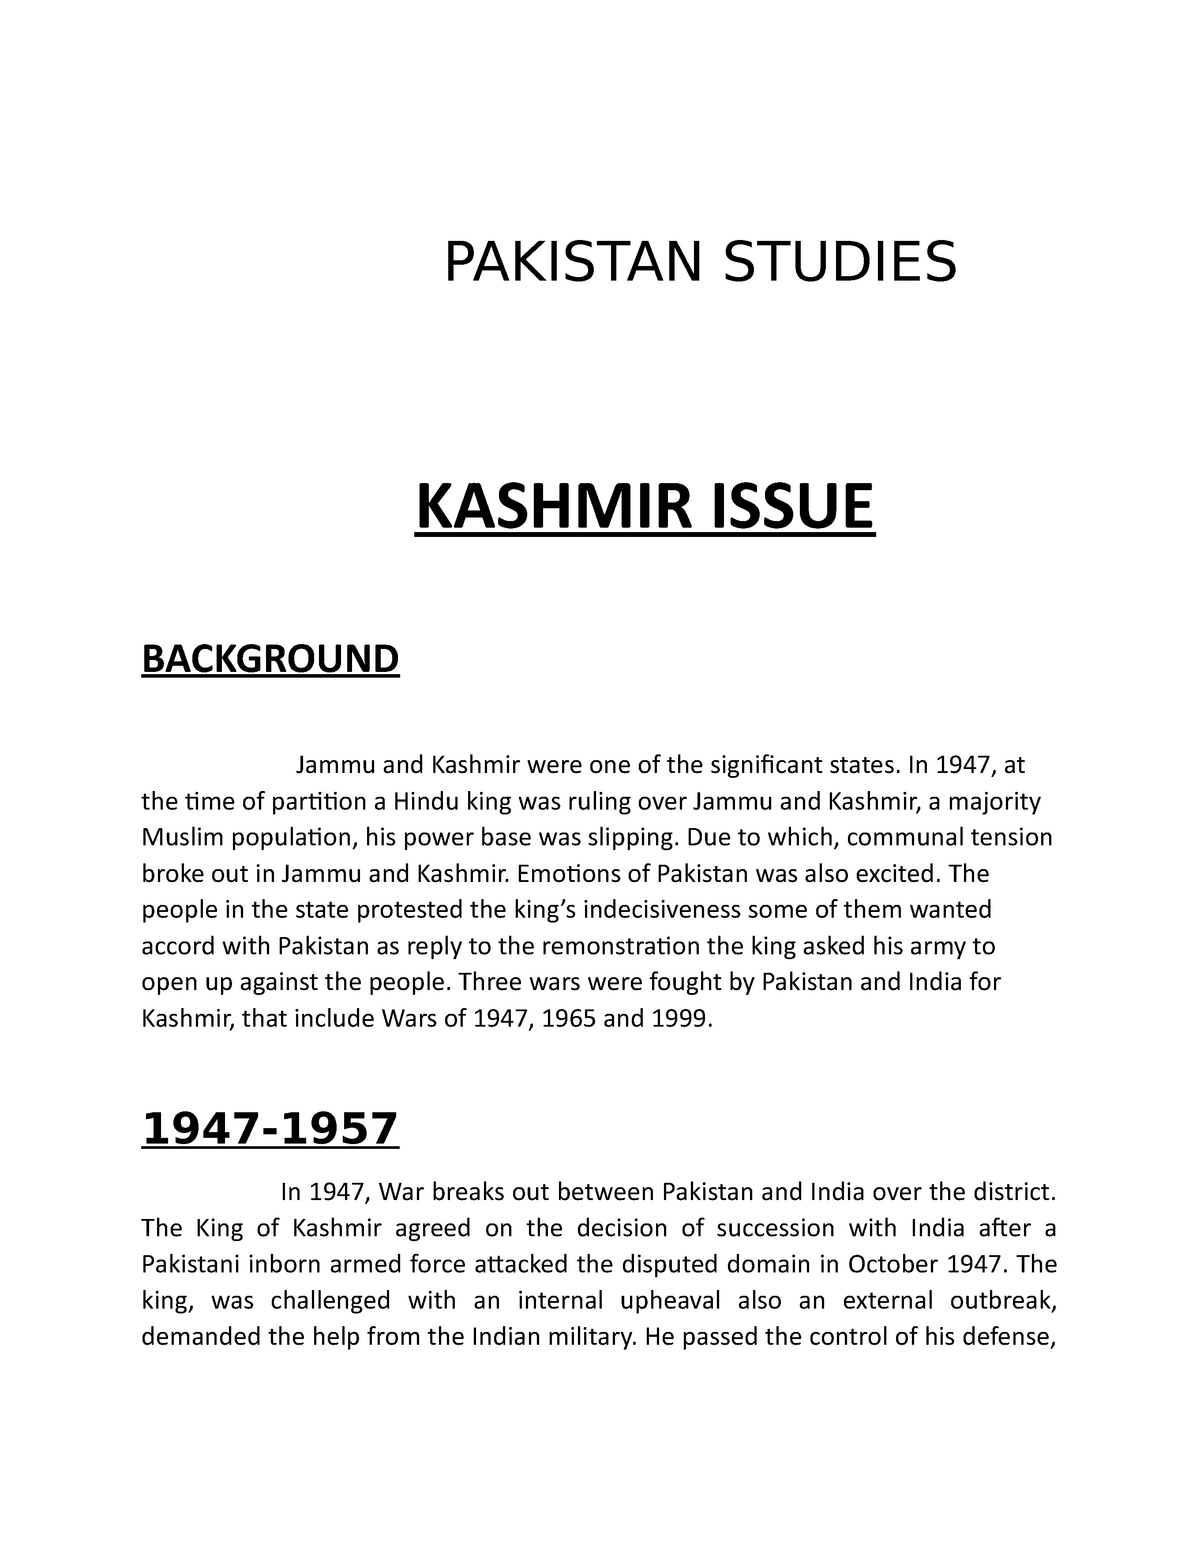 conclusion of kashmir issue essay